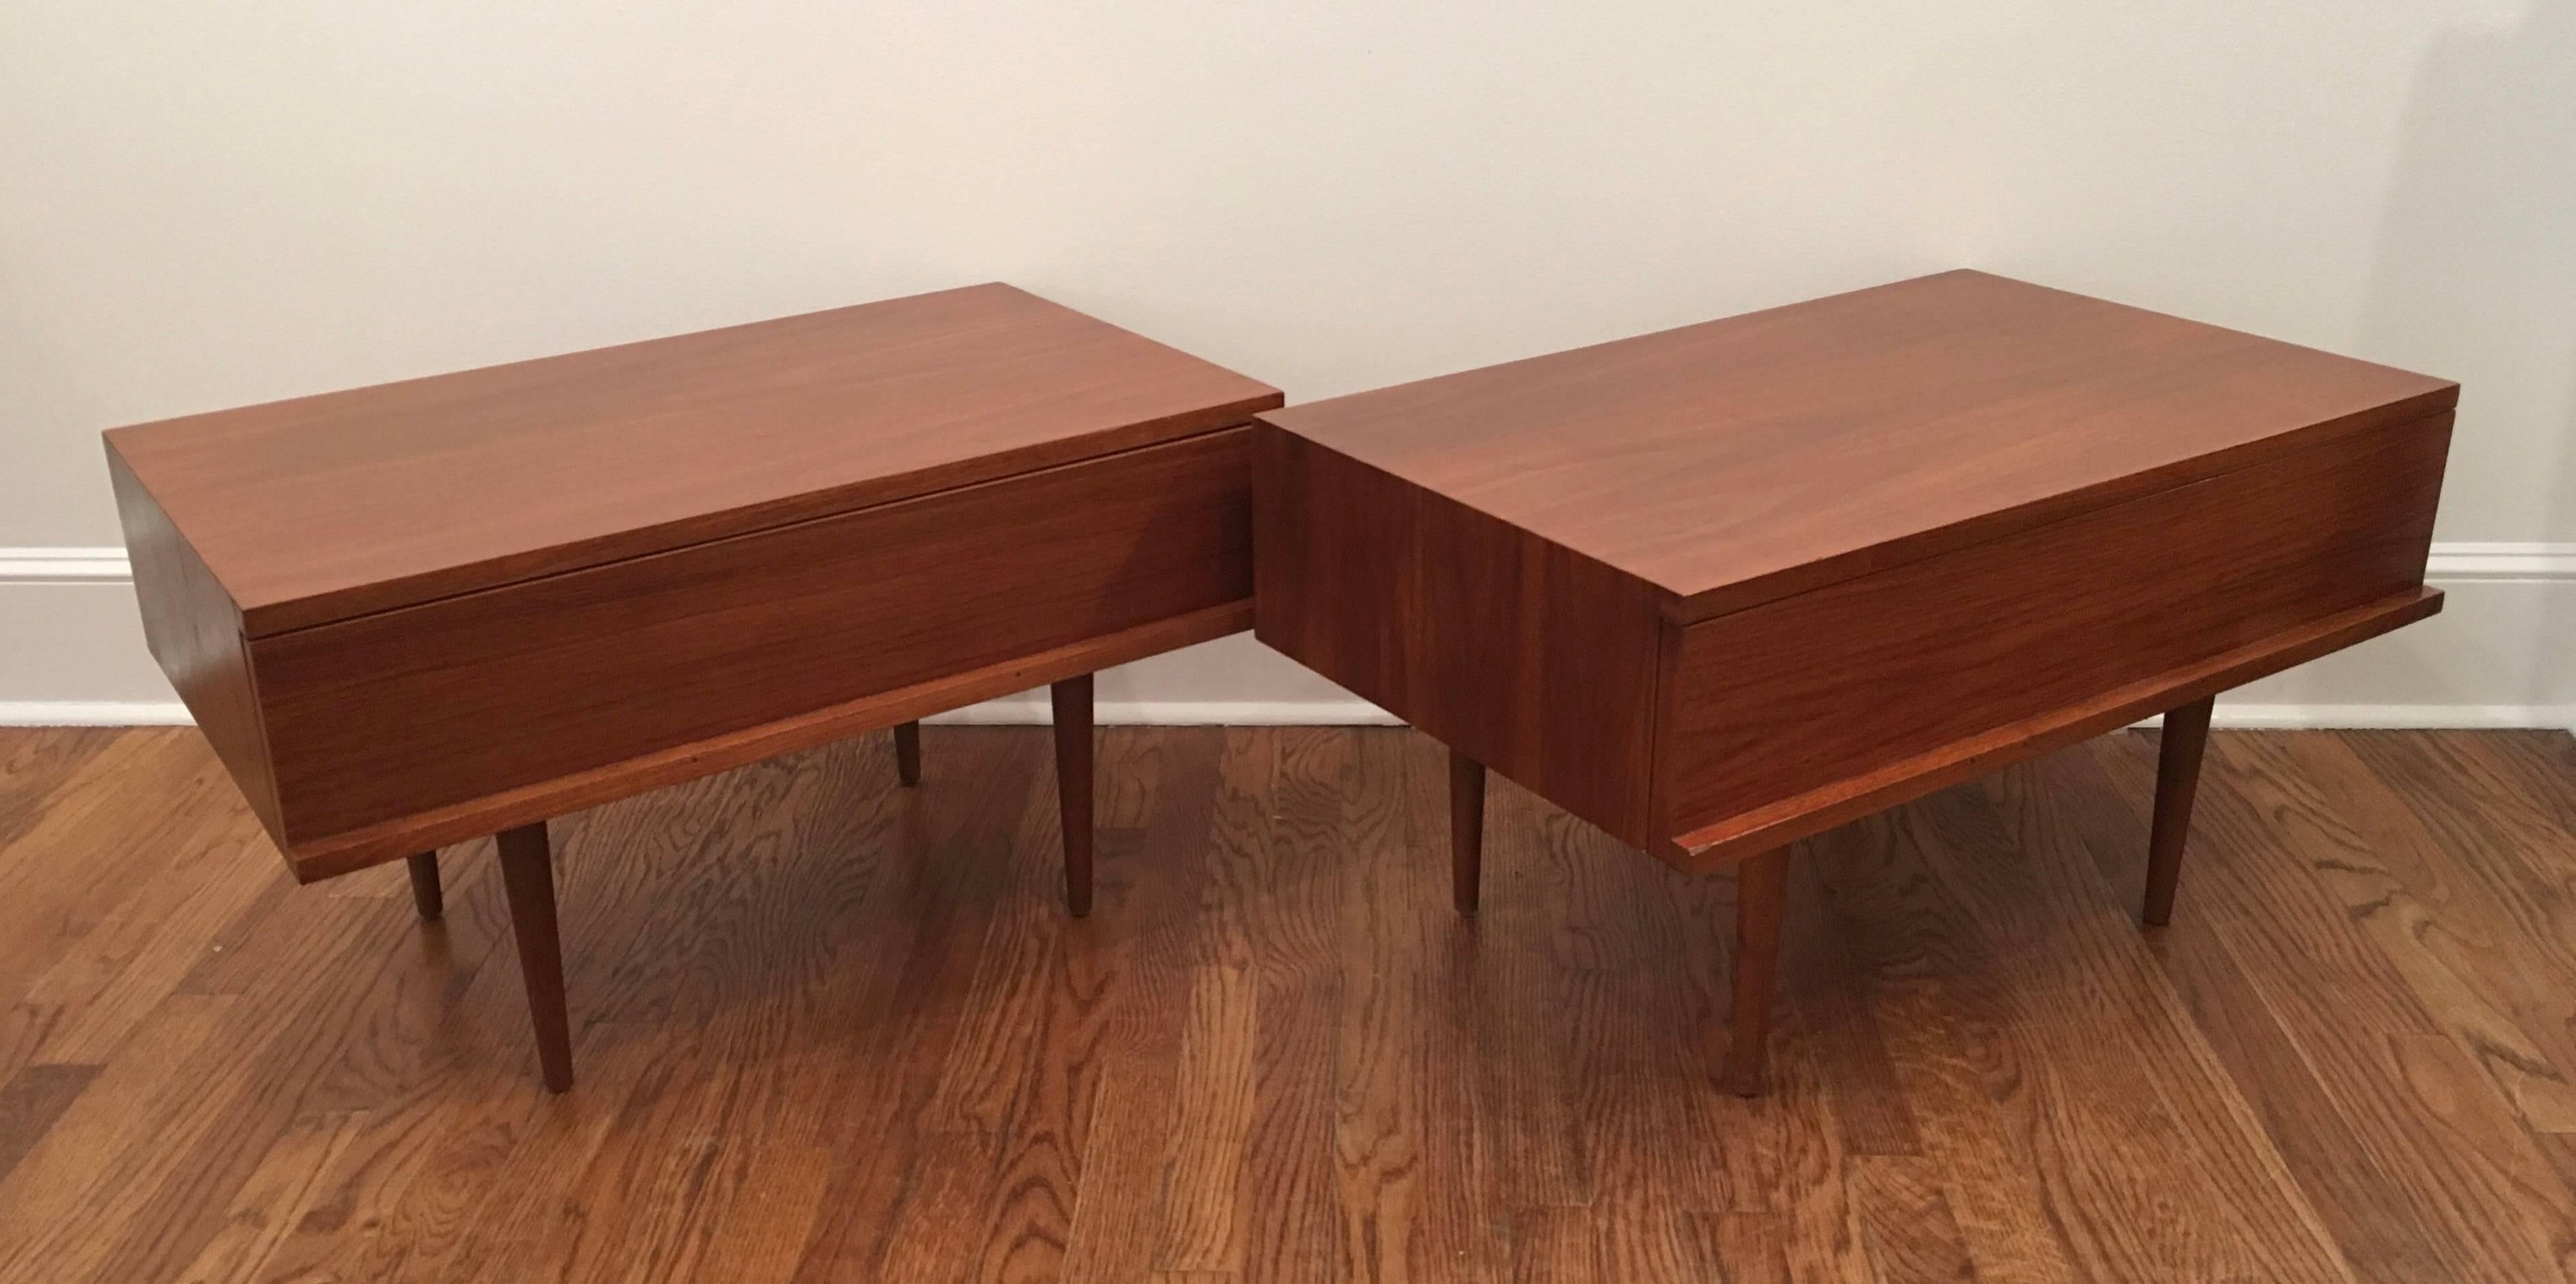 A rare pair of 1960s end/night tables designed by Mel Smilow. Walnut is bookmatched and has a beautiful grain and patina. Drawer handles are sculptural. Very elegant.